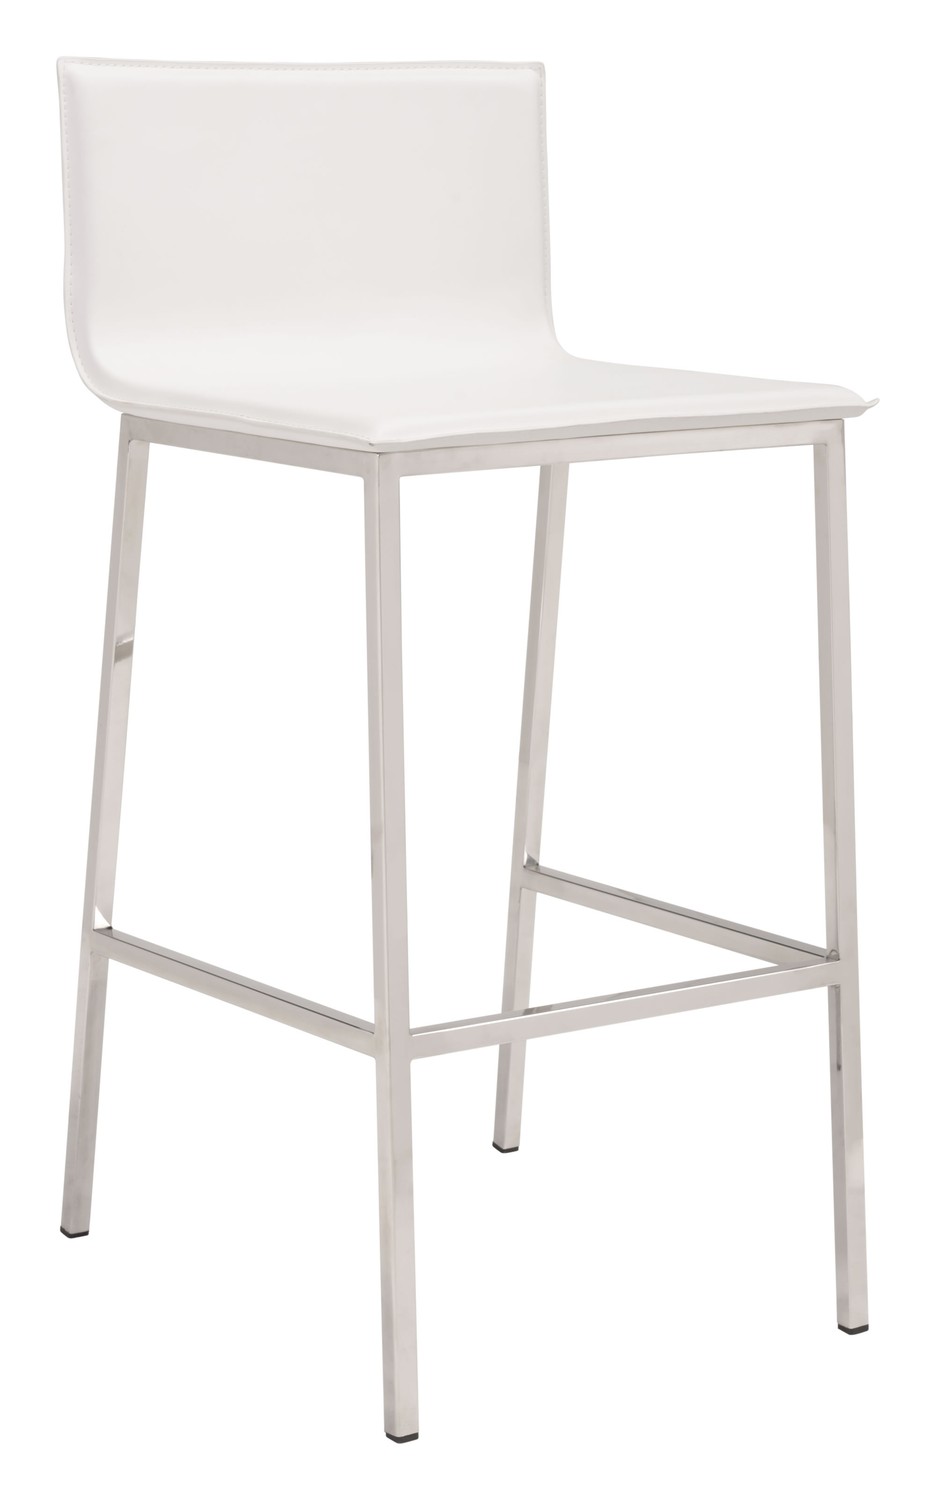 18.5" x 21.1" x 39" White, Leatherette, Stainless Steel, Barstool